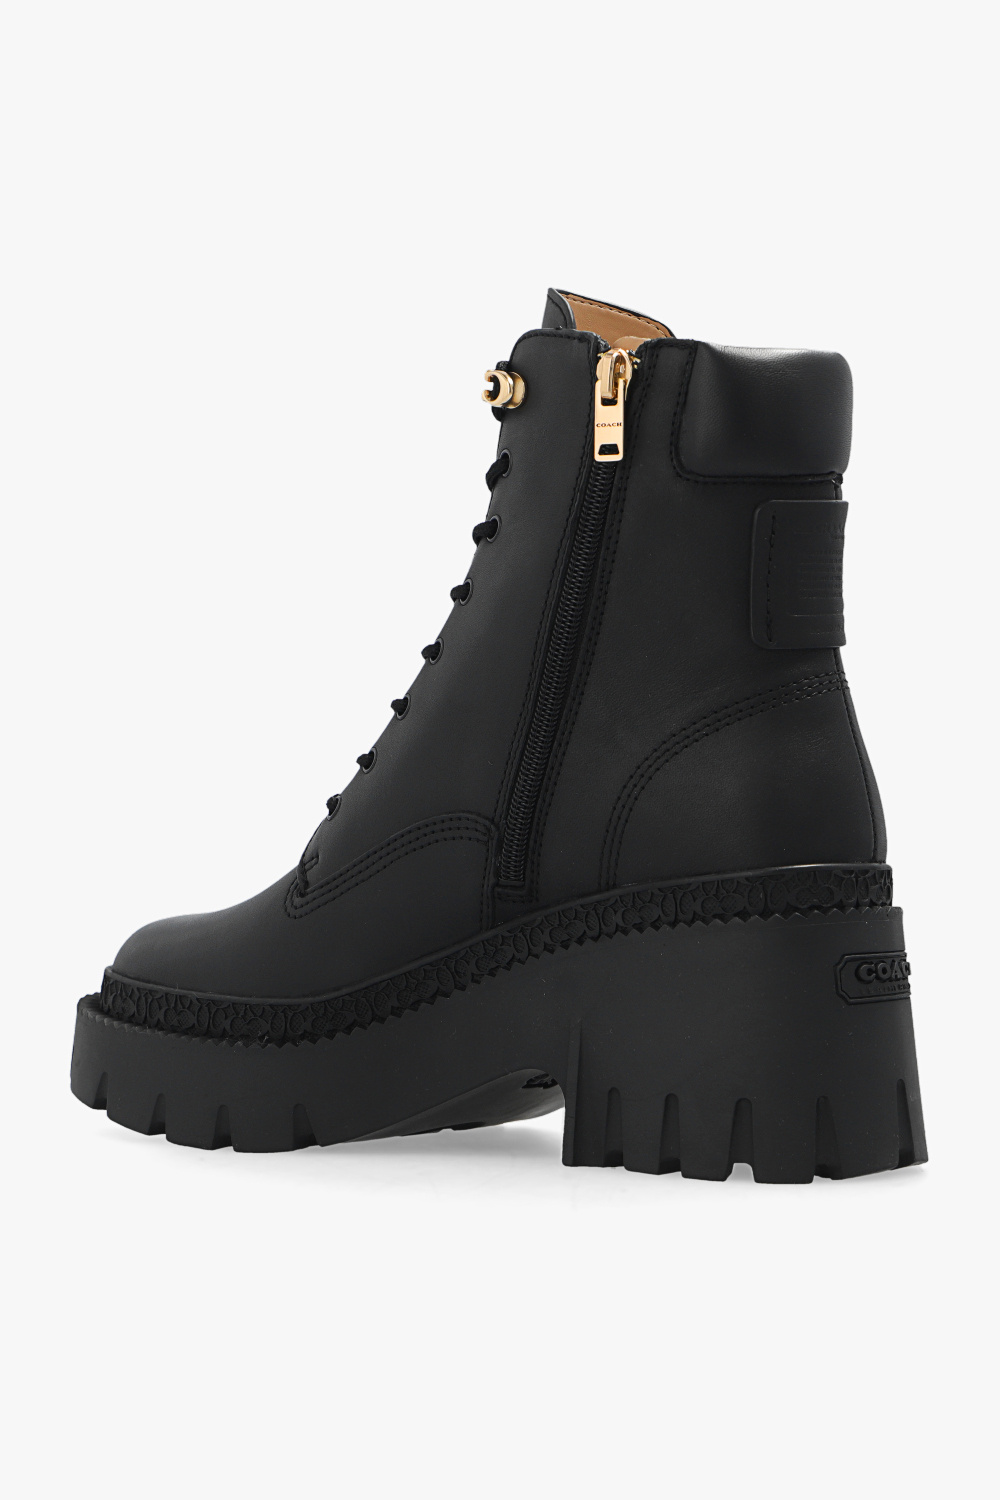 Coach ‘Ainsley’ leather ankle boots